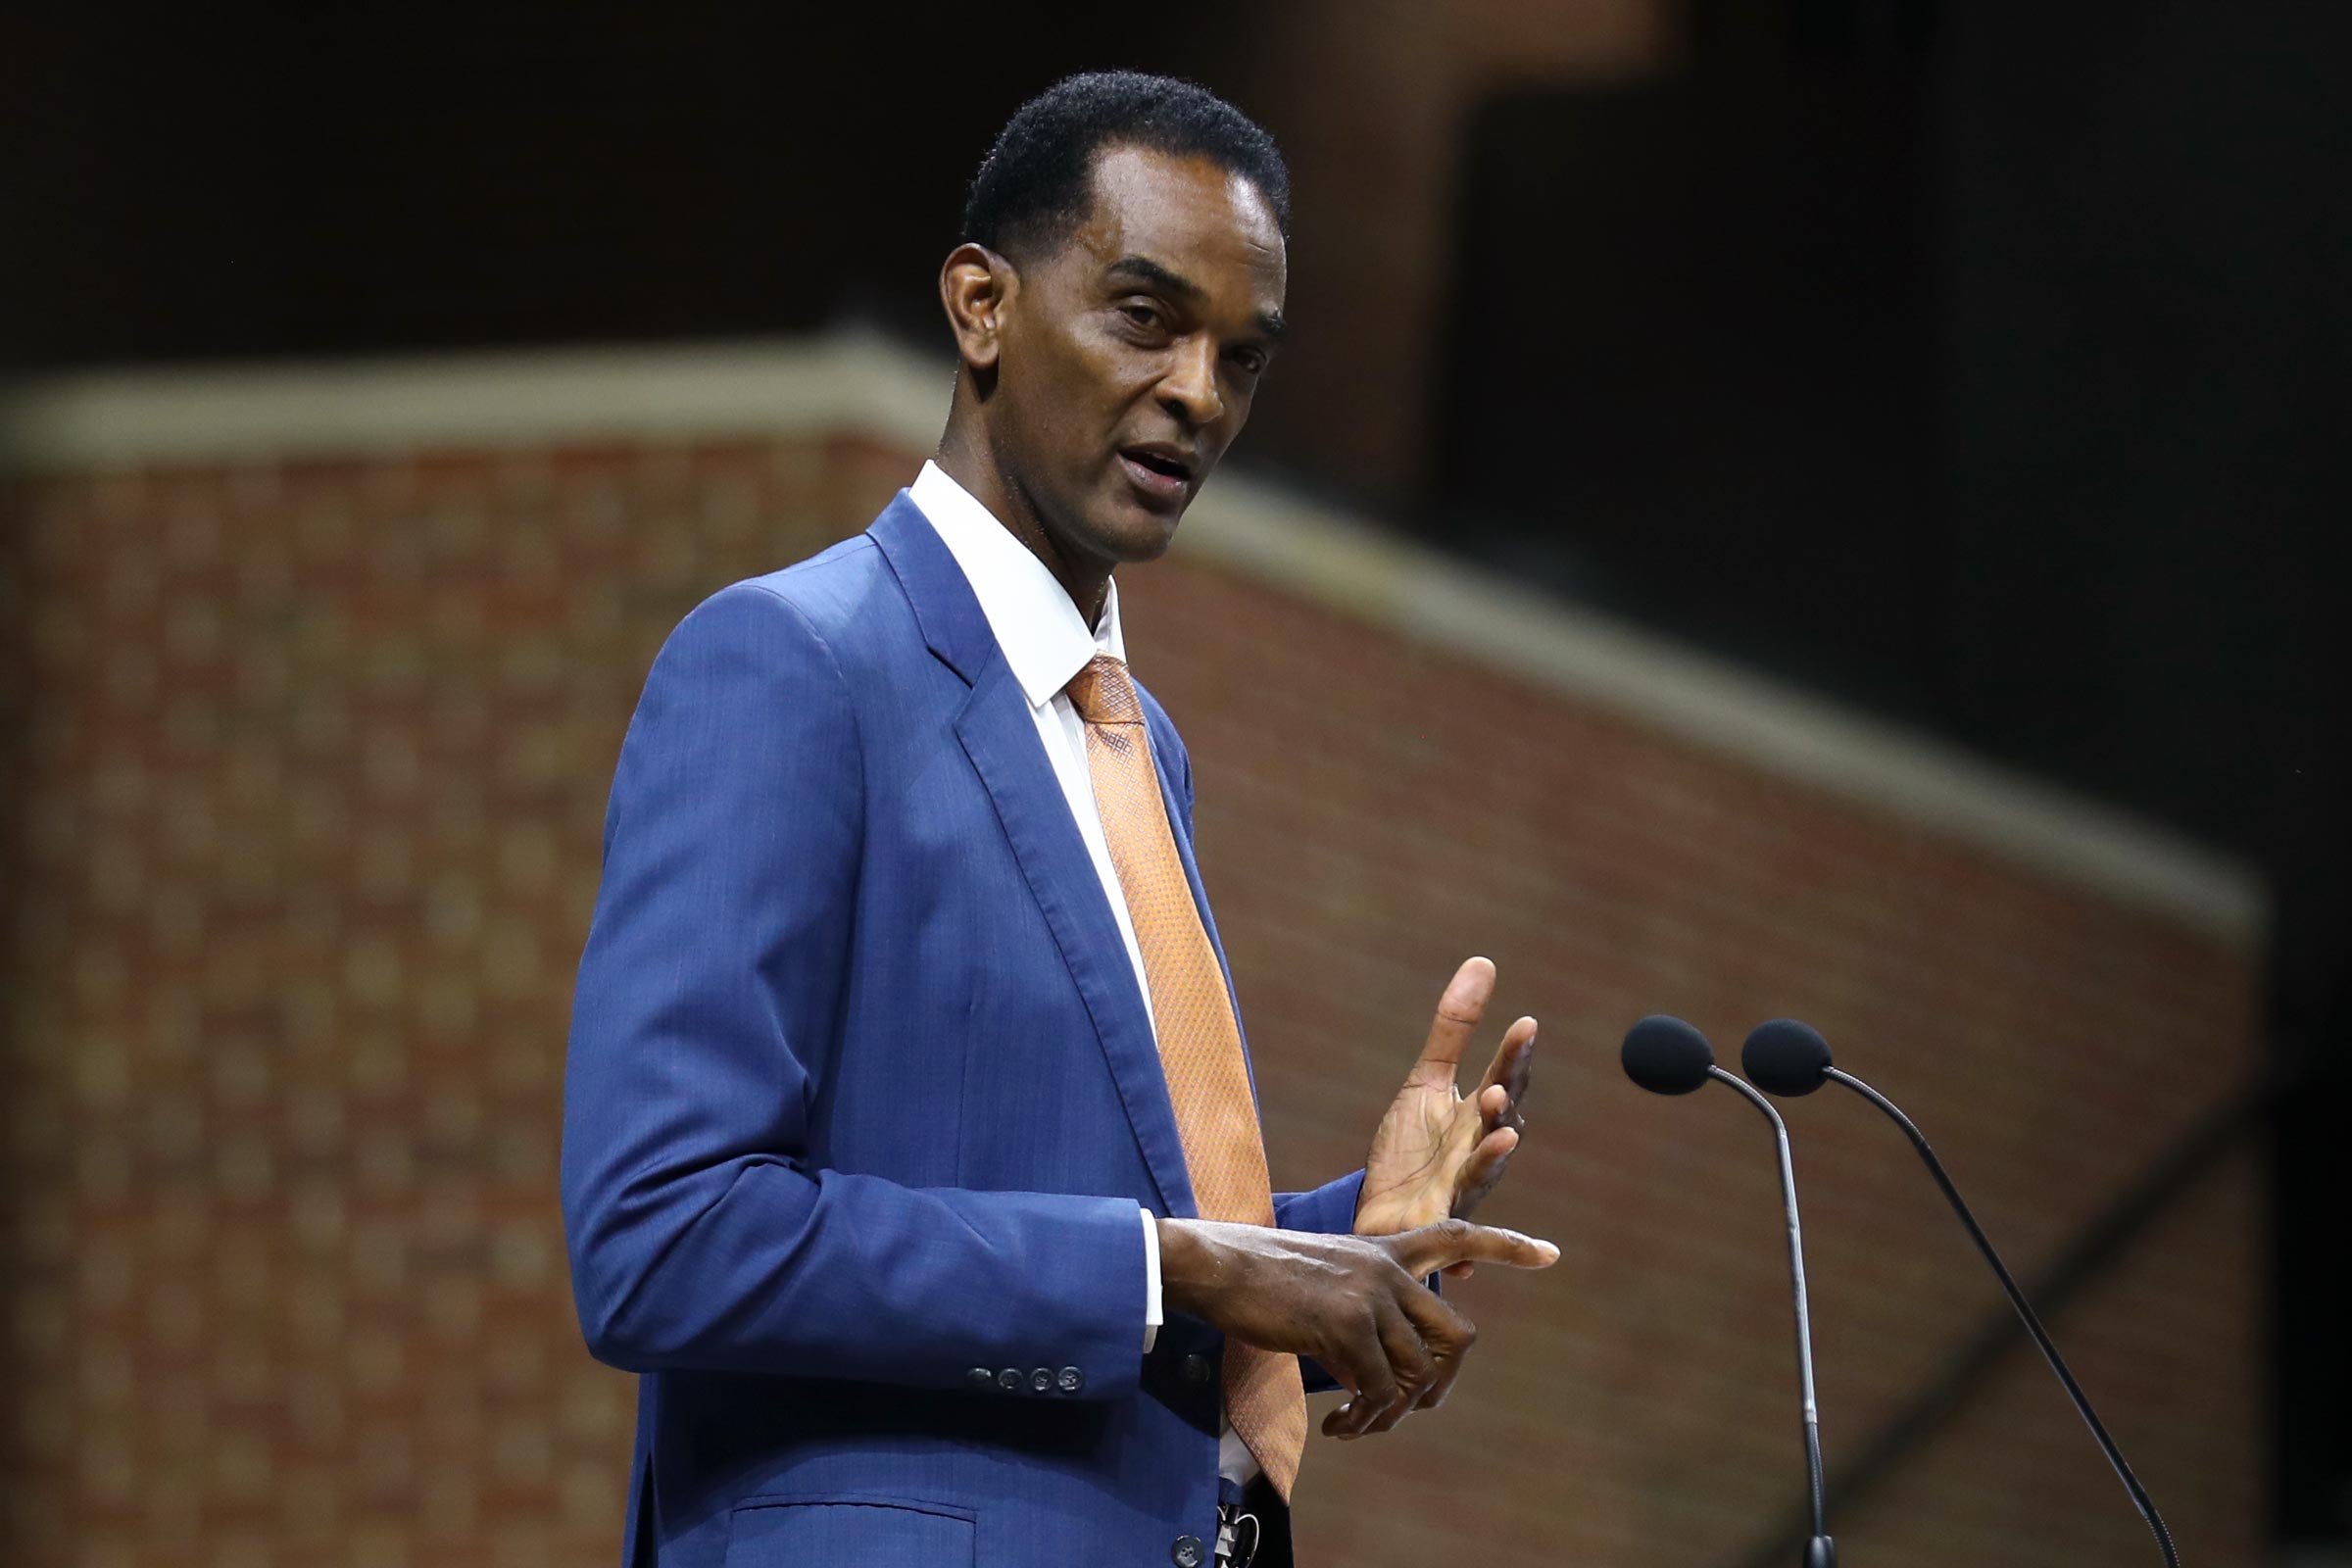 Ralph Sampson, in a blue suit and orange tie, gives a speech at a podium